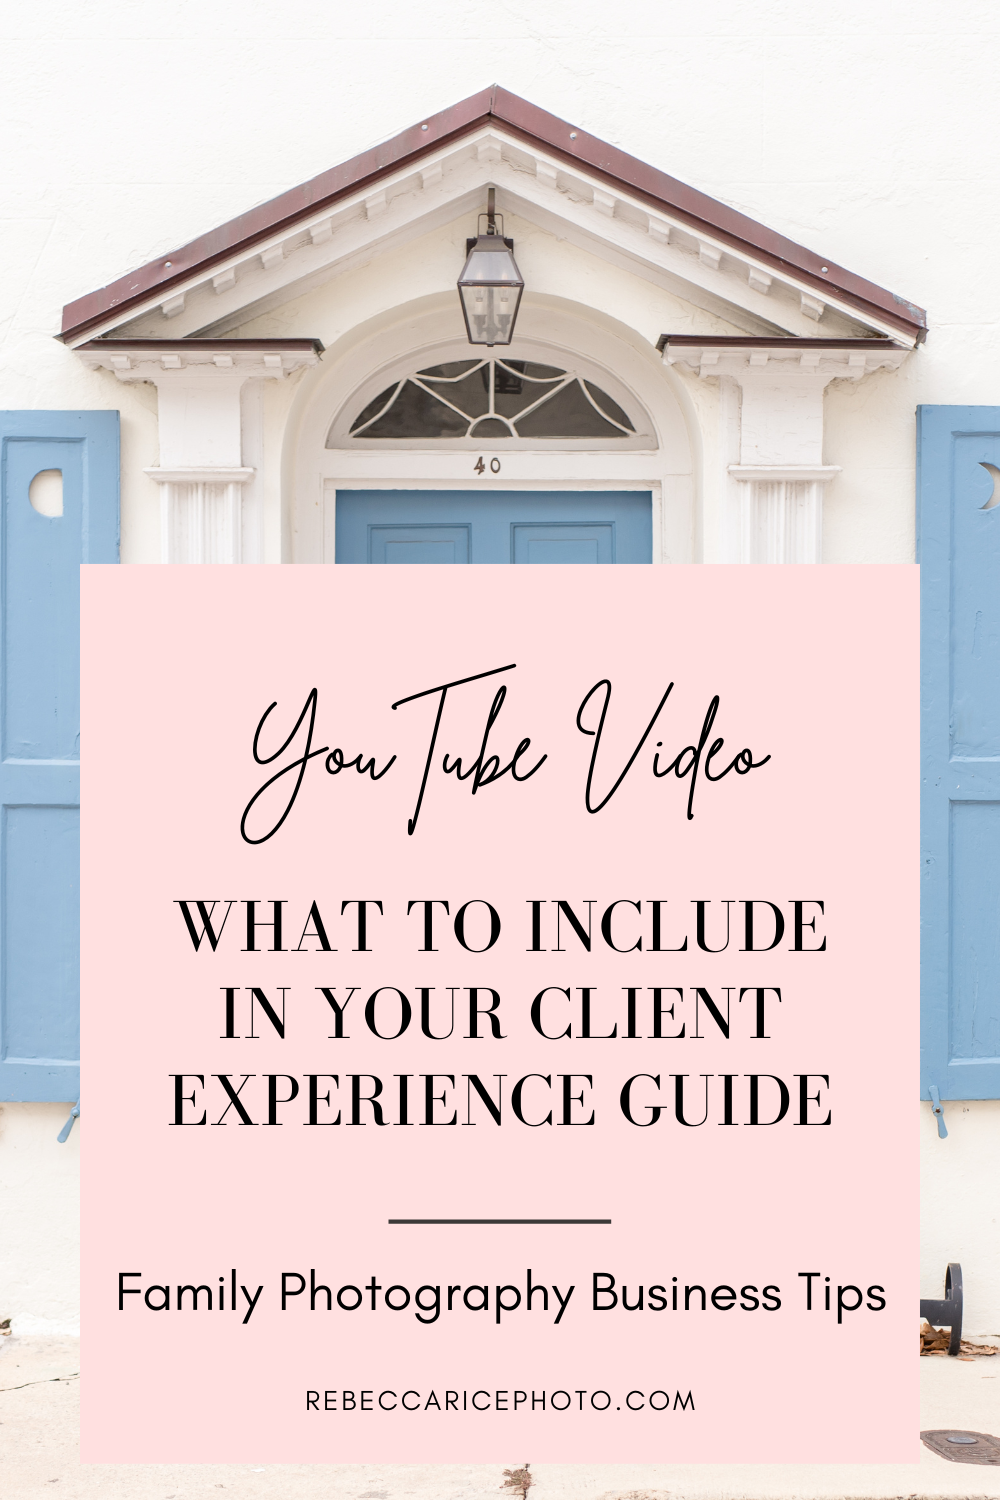 What to Include in Your Client Experience Guide | Family Photography Business Tips